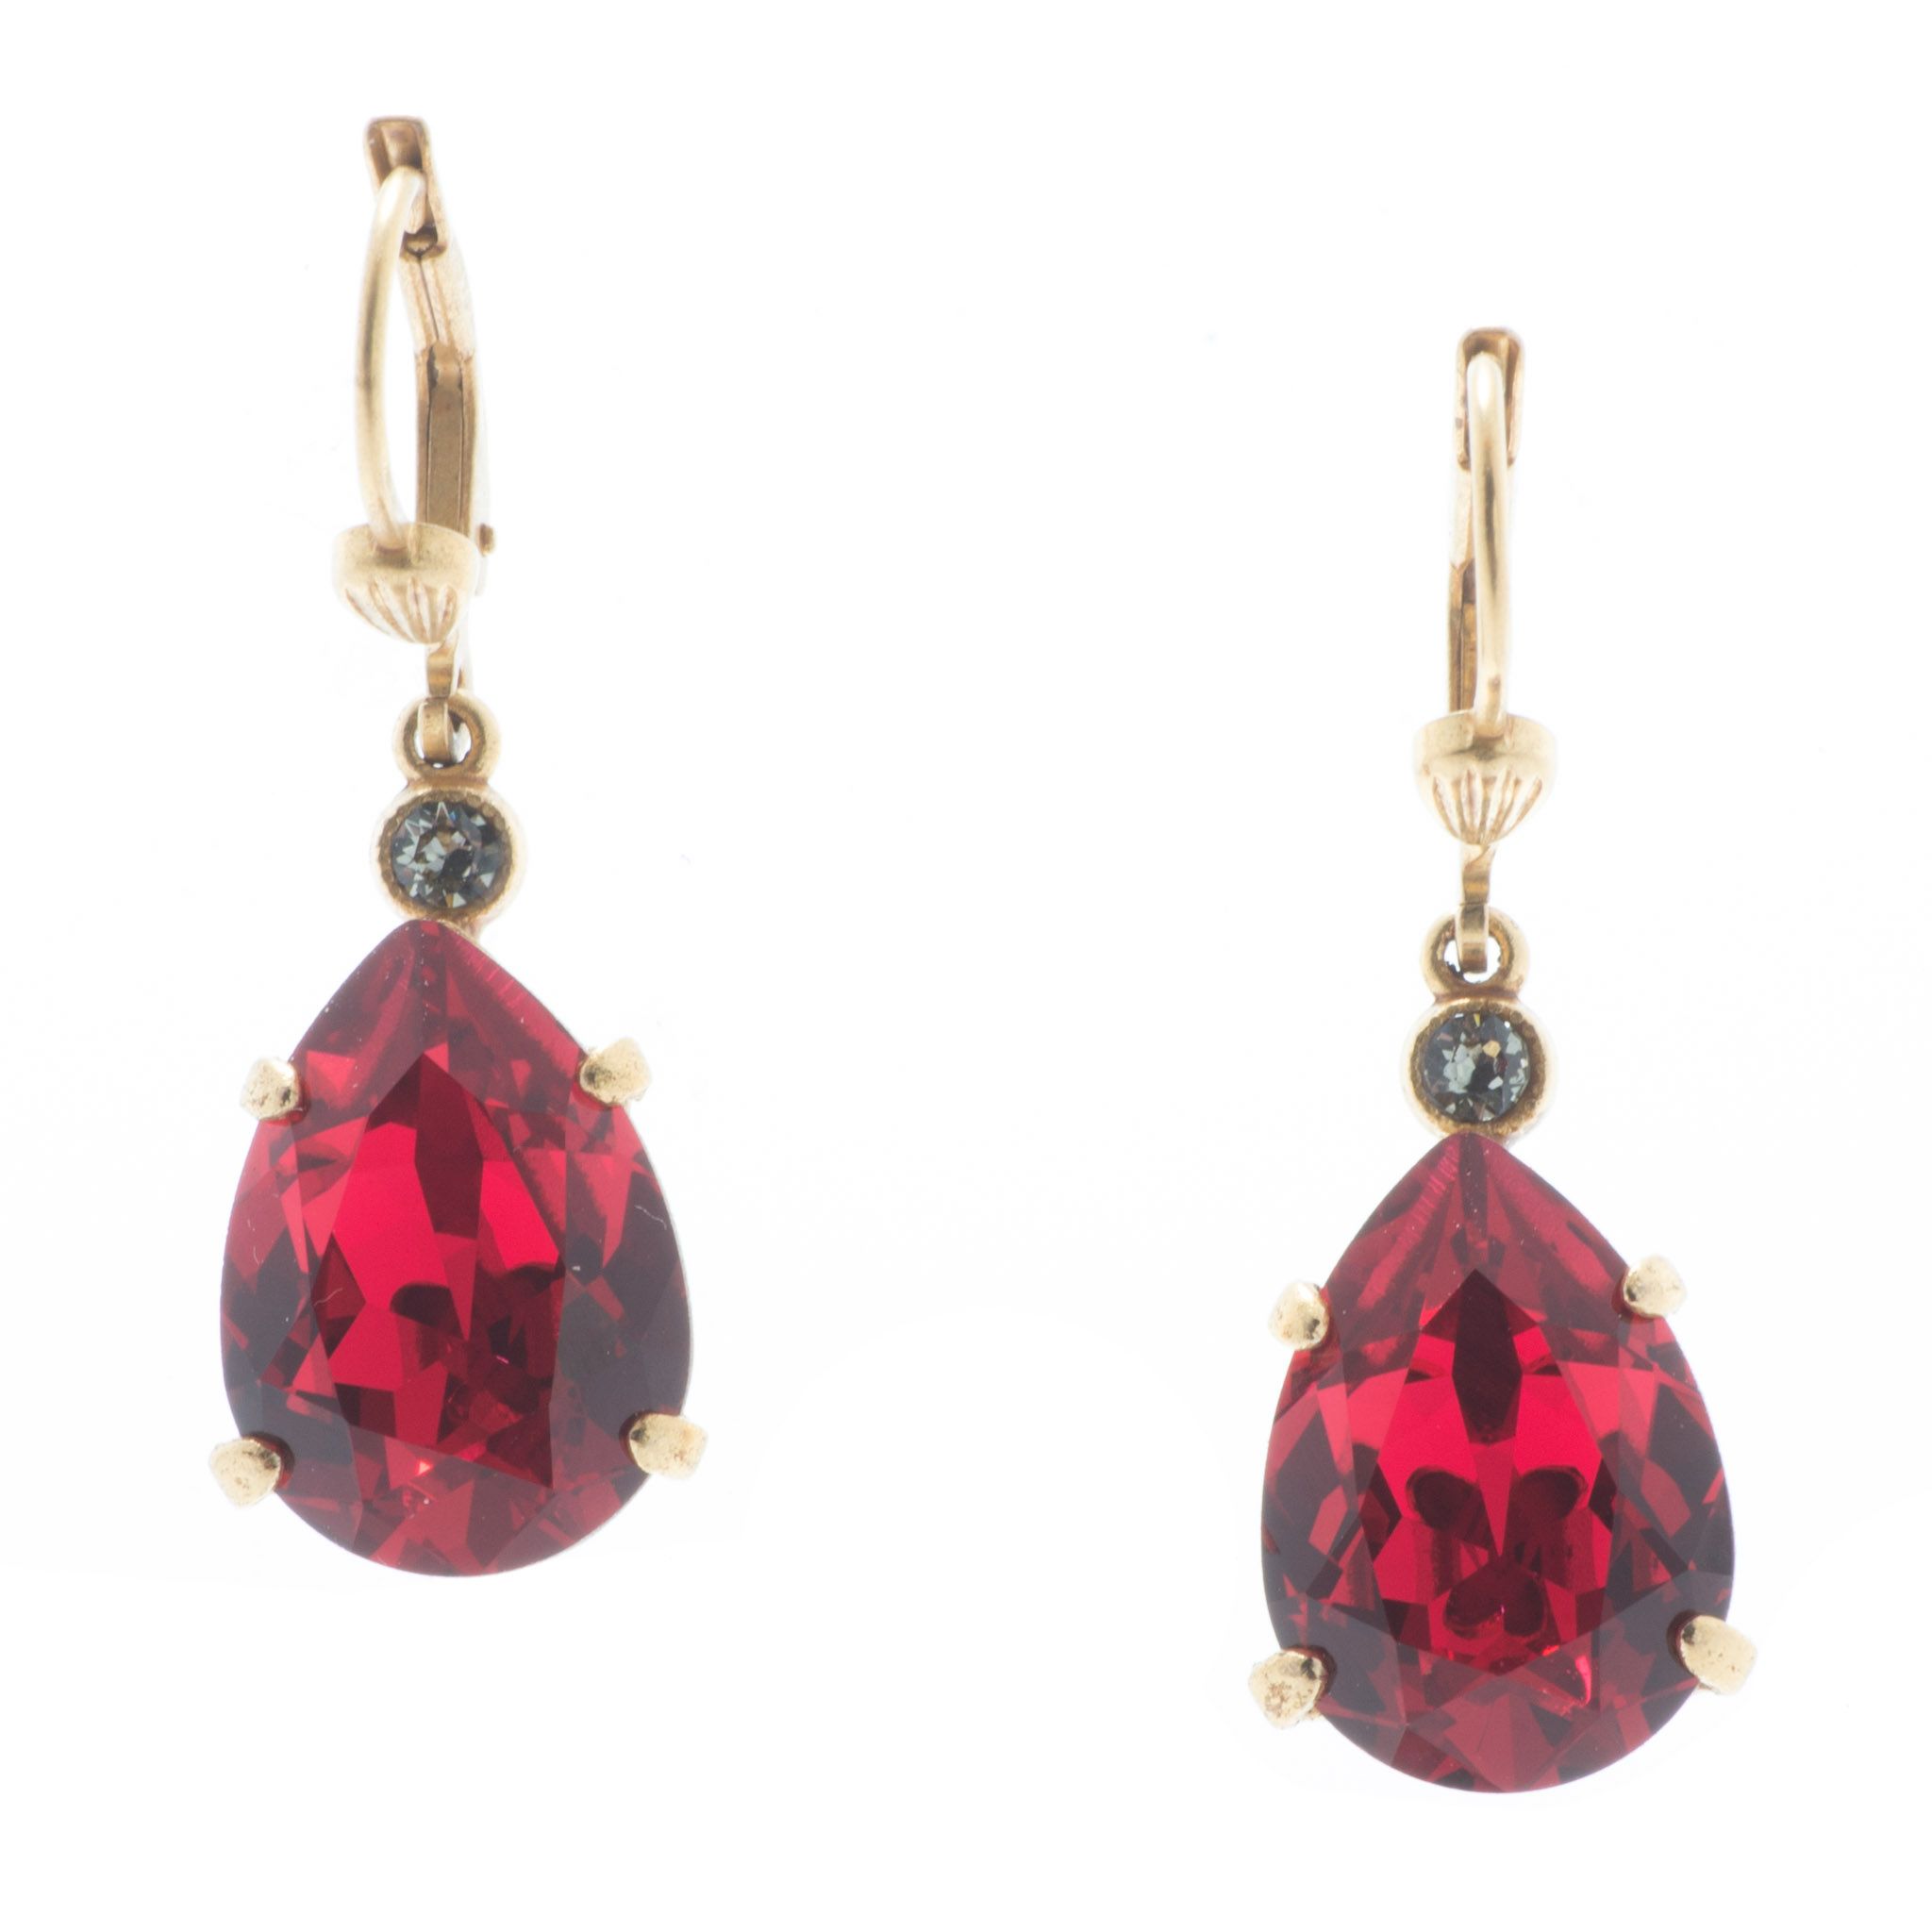 Catherine Popesco 12mm Large Stone Crystal Earrings - Scarlet Red